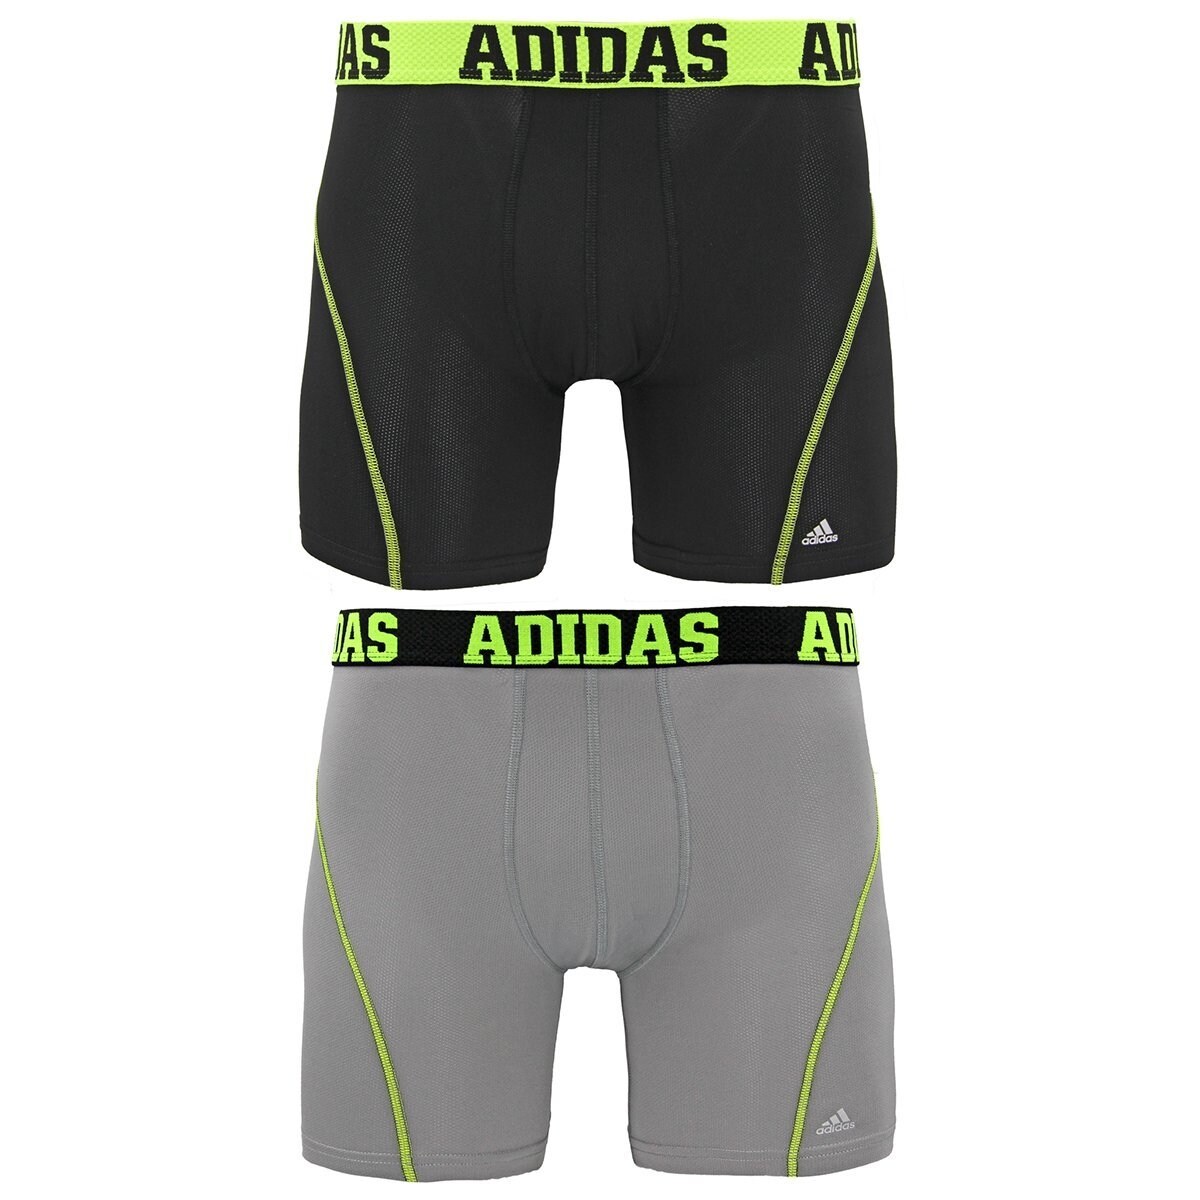 adidas climacool boxer briefs review